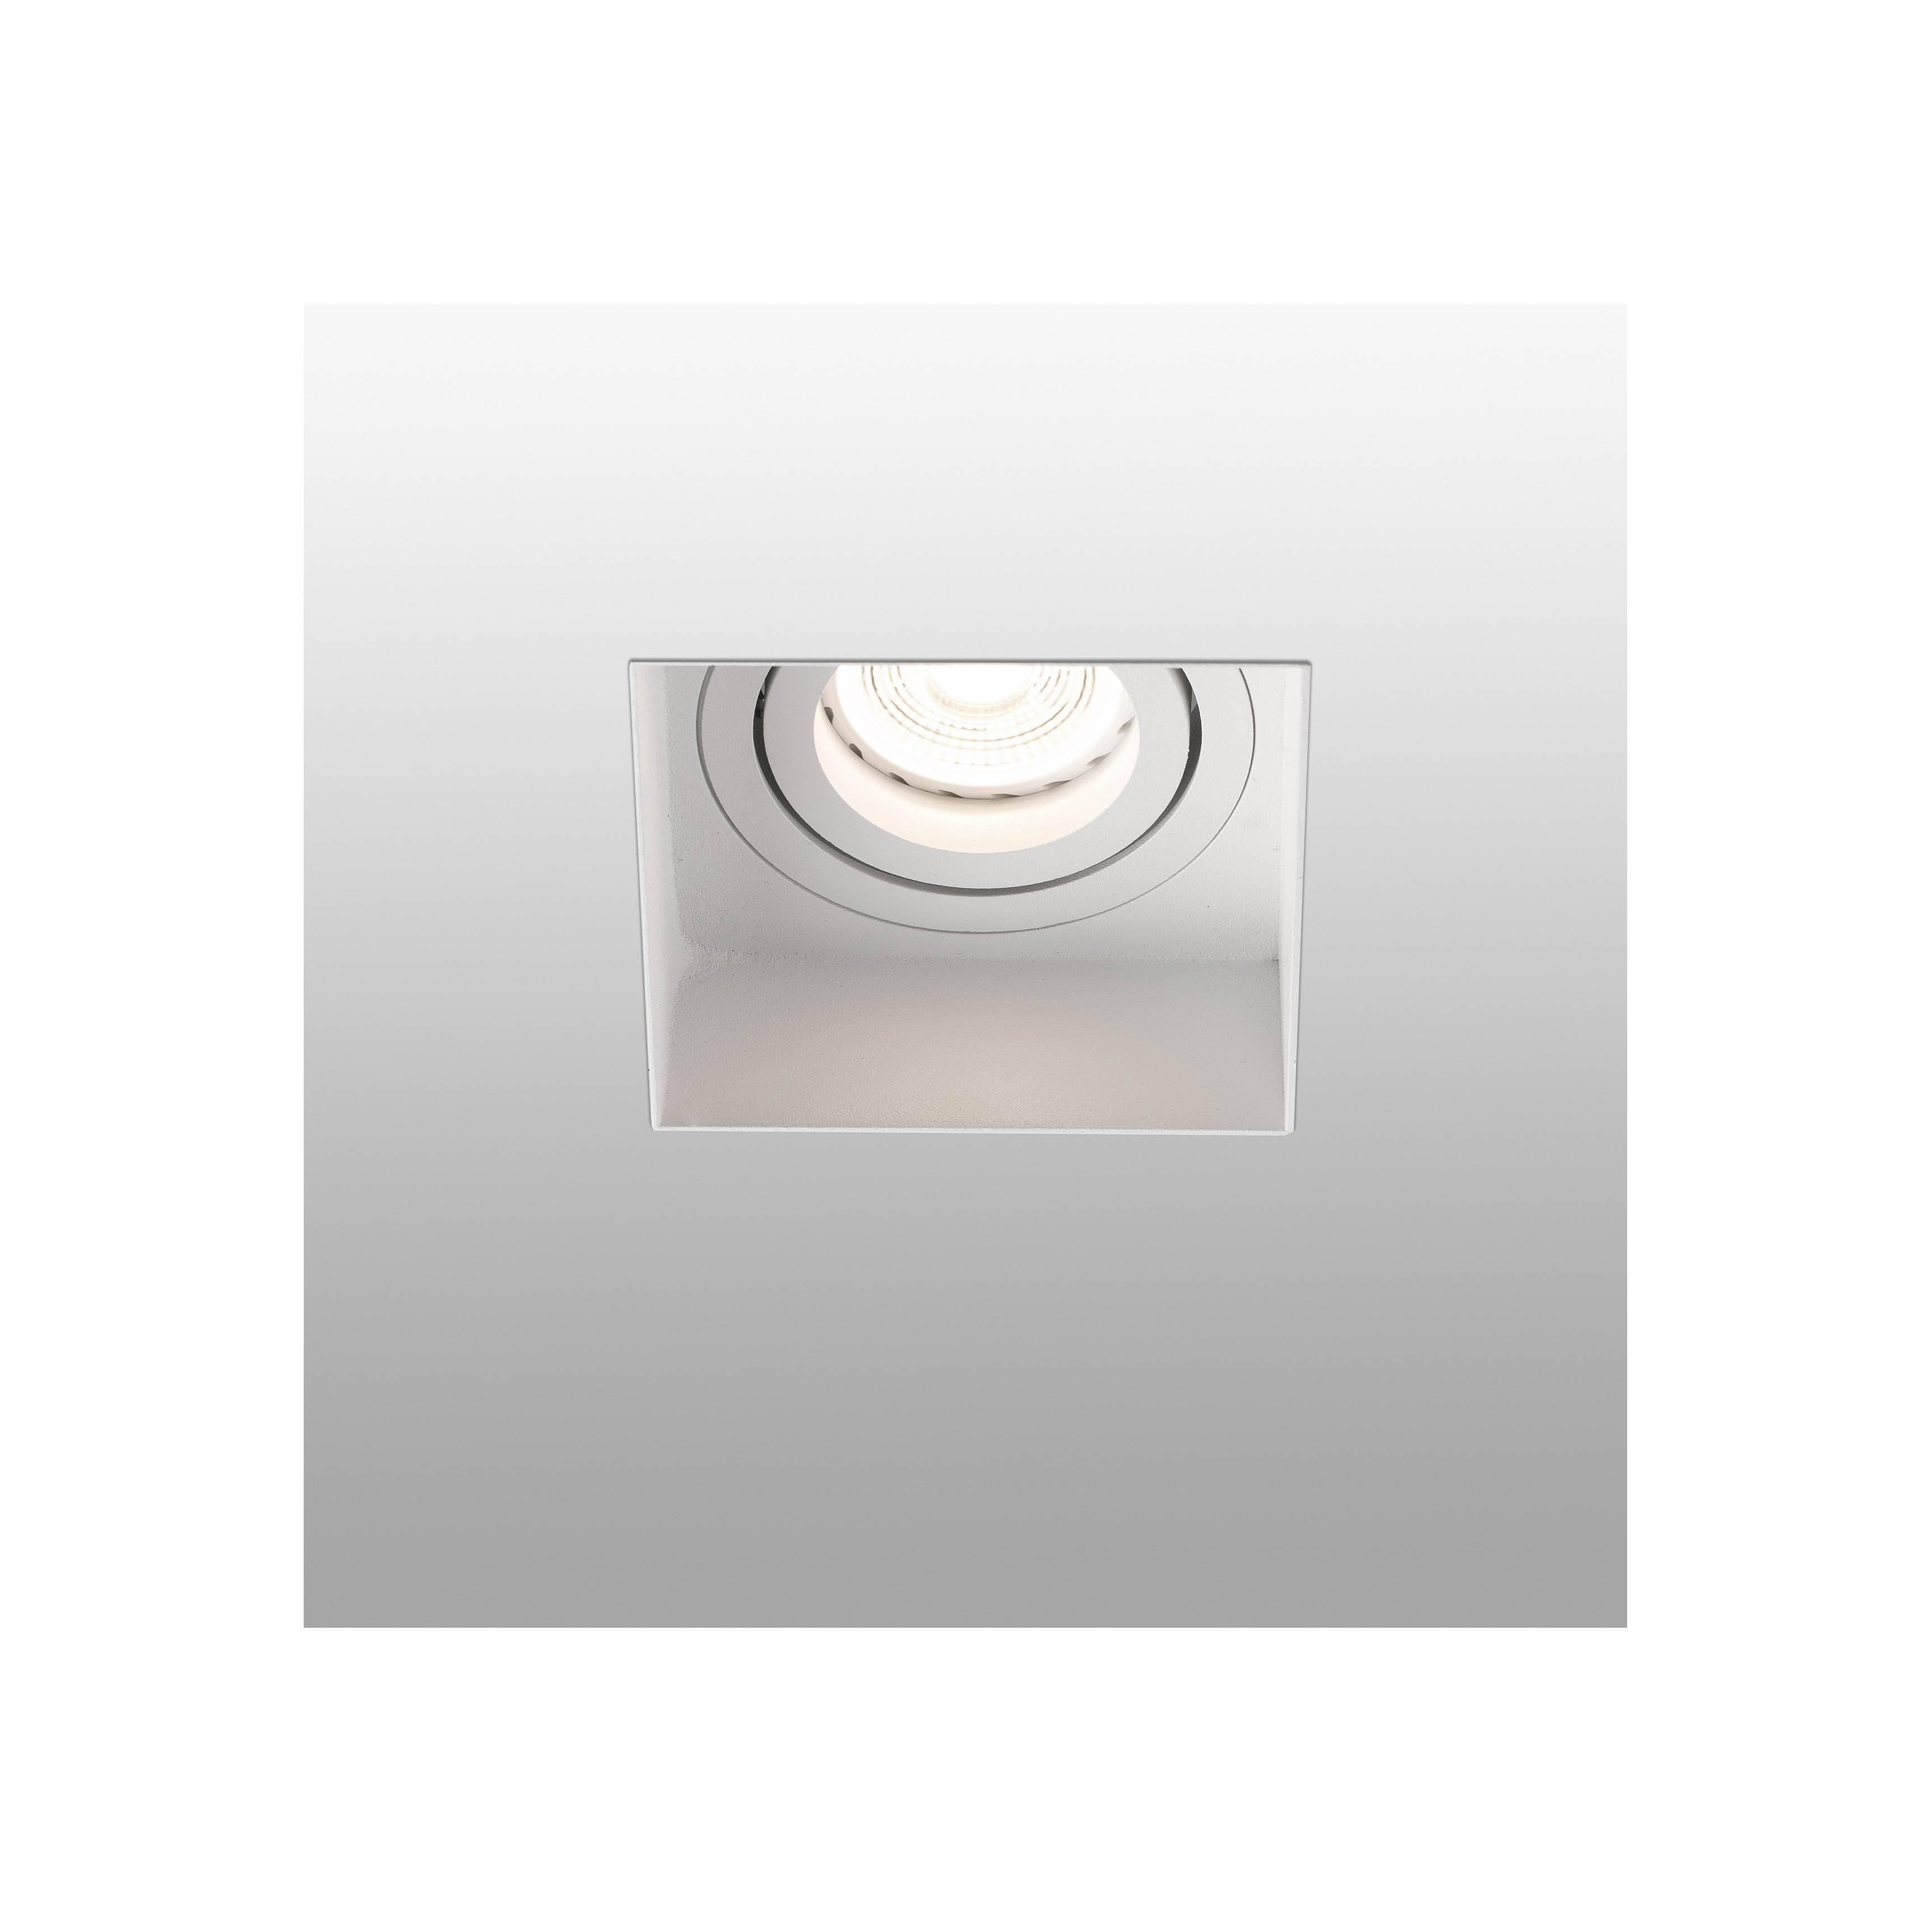 Hyde White Tiltable square recessed Downlight Trimless GU10